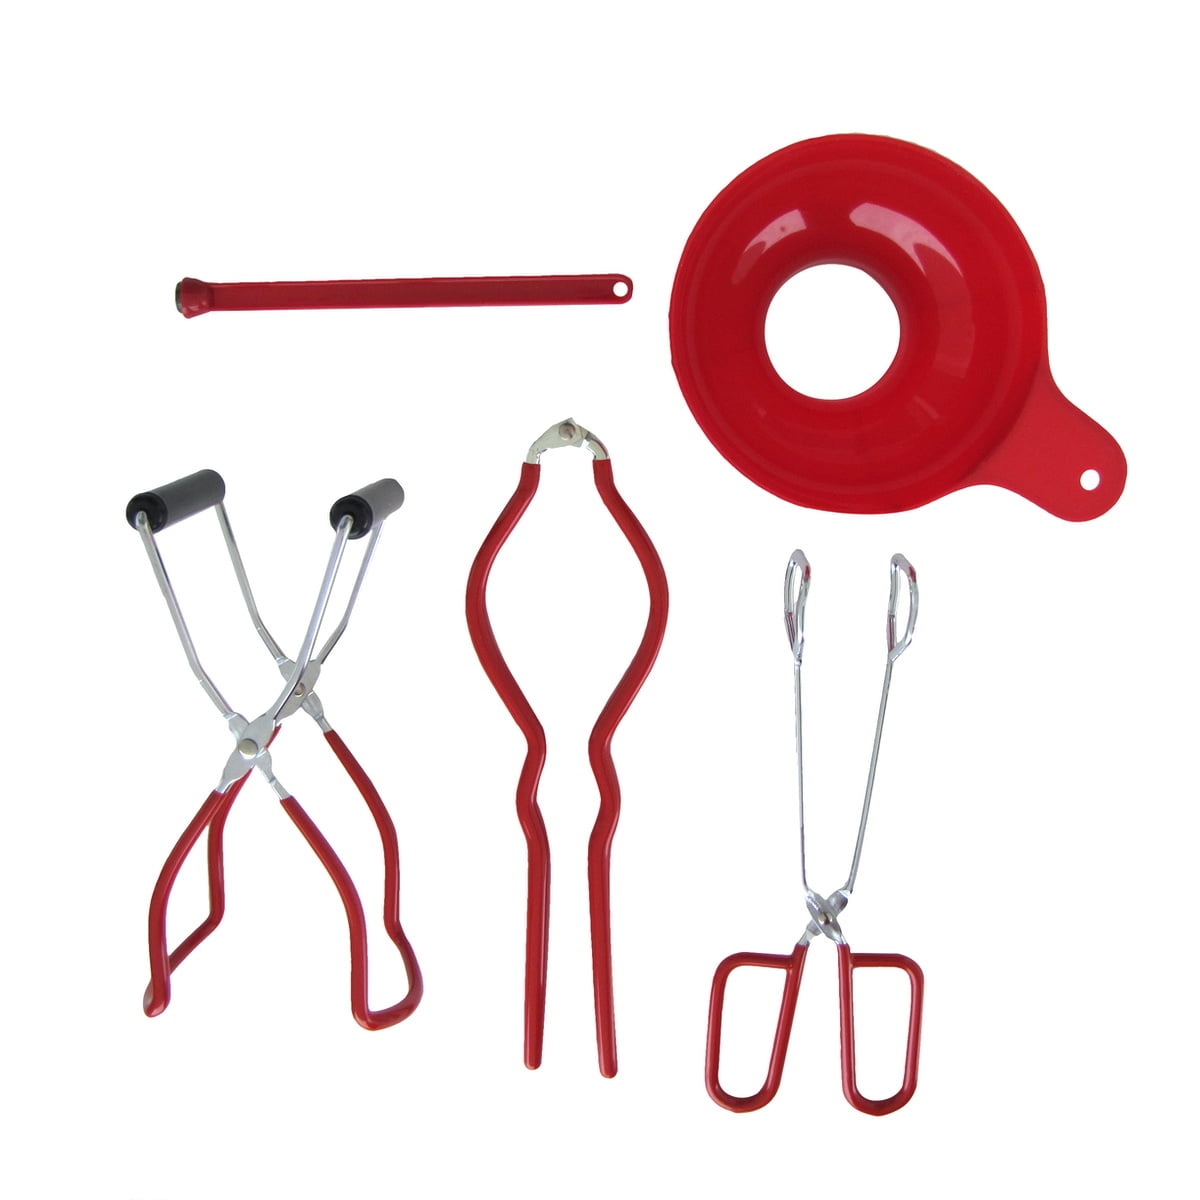 Canning Tool Set Kit 6 Pieces Canning Supplies Include Canning Jar Lifter Canning Funnel Jar Wrench Lid Lifter Tongs Bubble Popper for Jars Mason Kitchen Anti-Scaled Clip Suit 